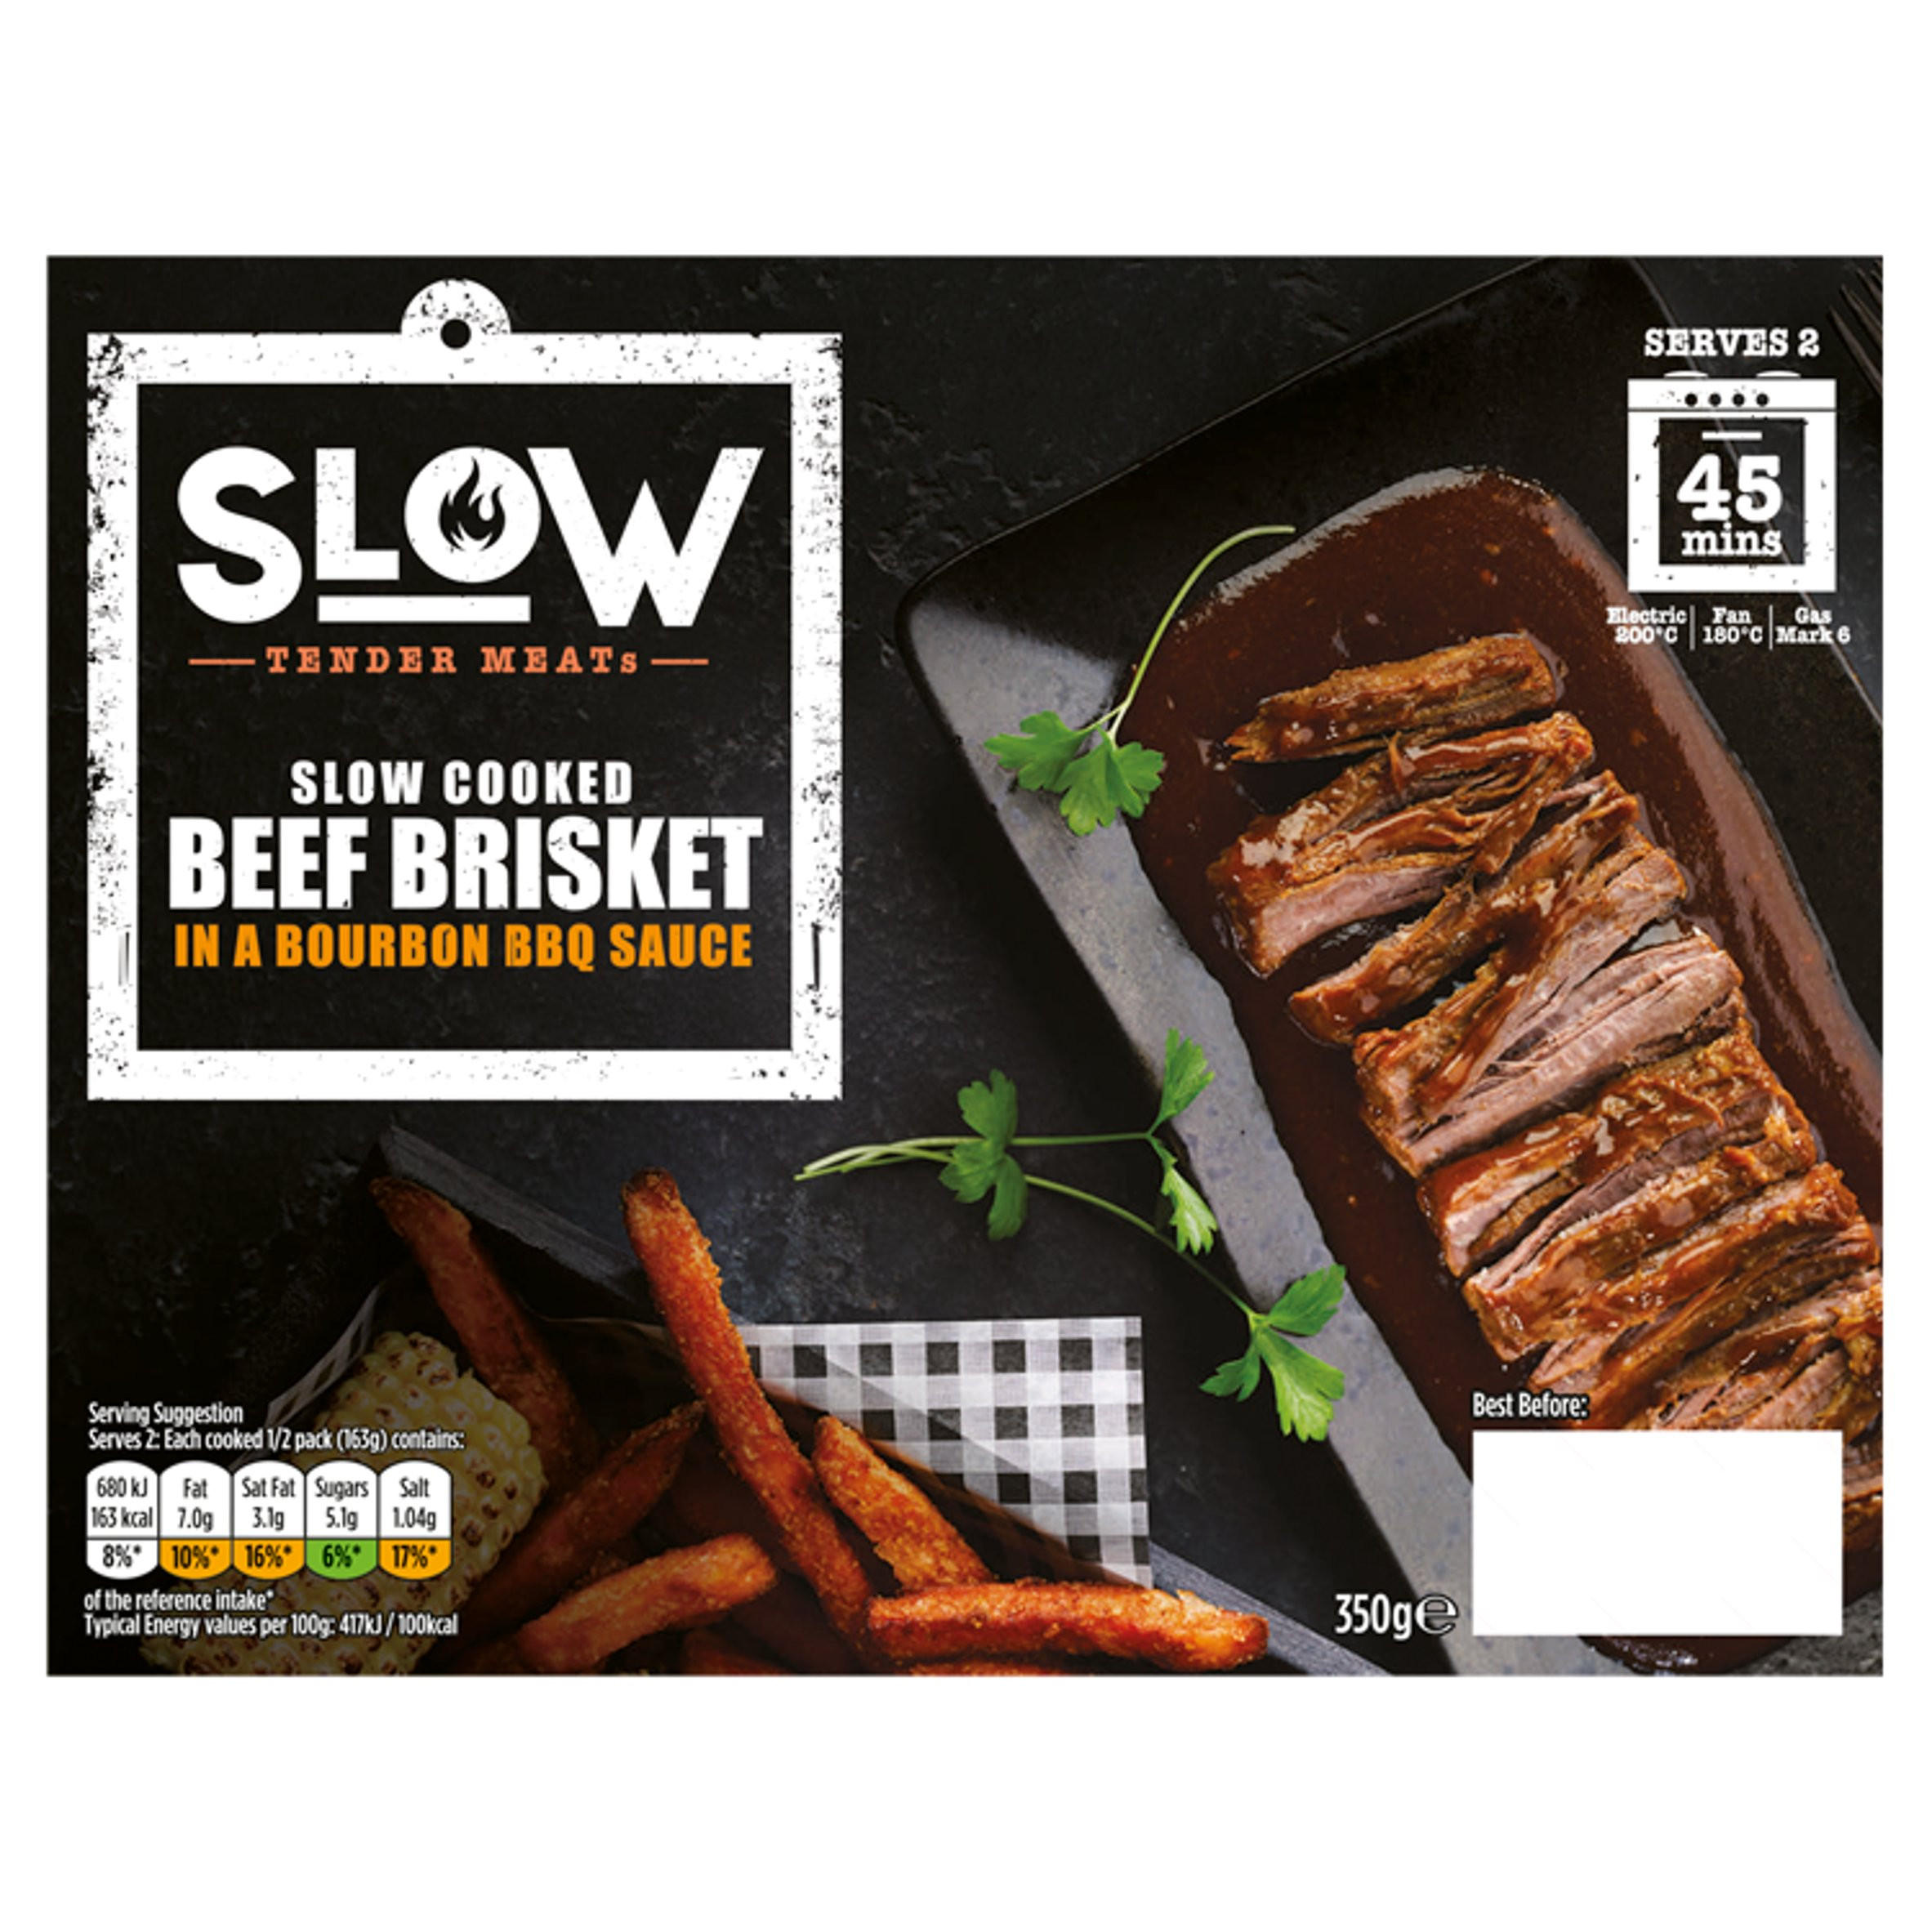 Slow Tender Meats Slow Cooked Beef Brisket in a Bourbon BBQ Sauce 350g ...